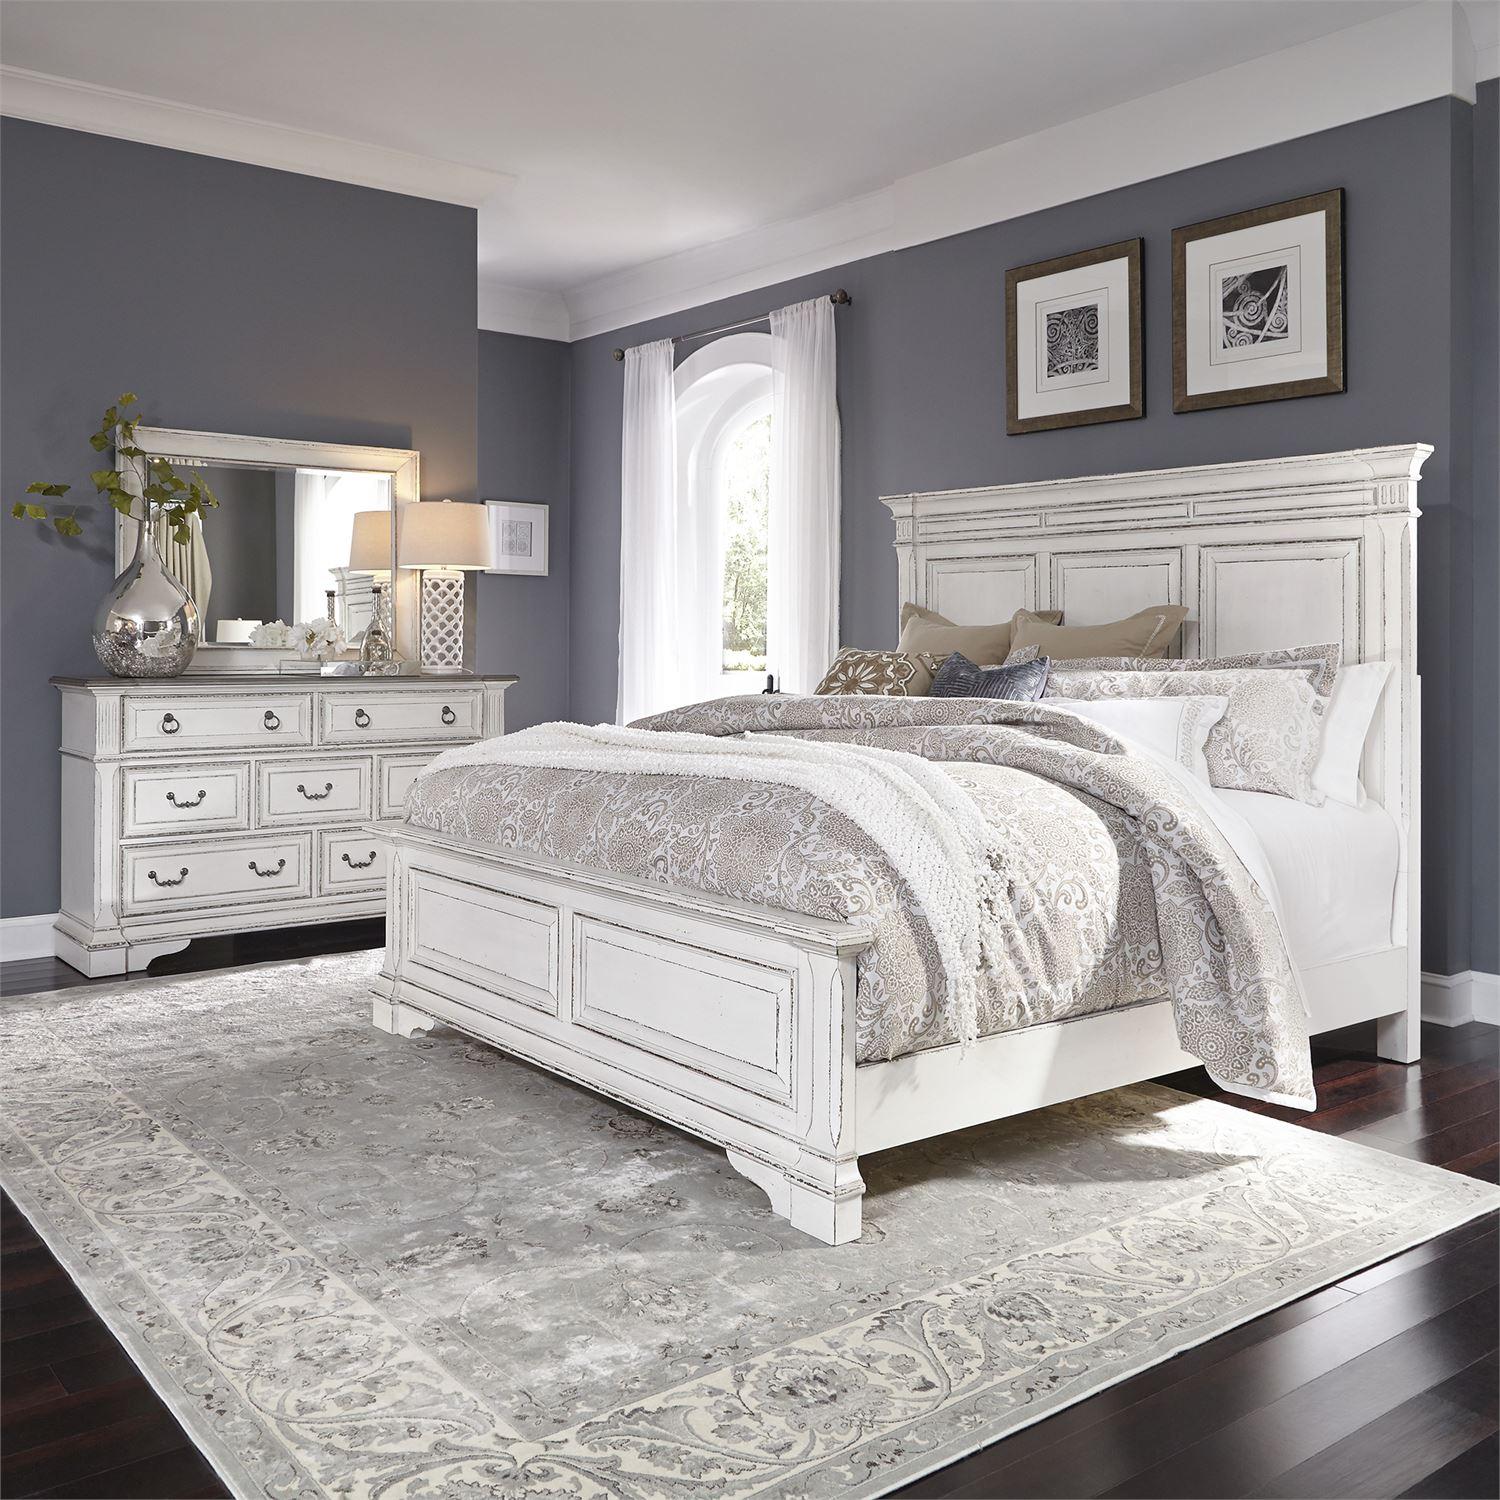 Traditional Panel Bedroom Set Abbey Park 520-BR-QPBDM 520-BR-QPBDM in White 